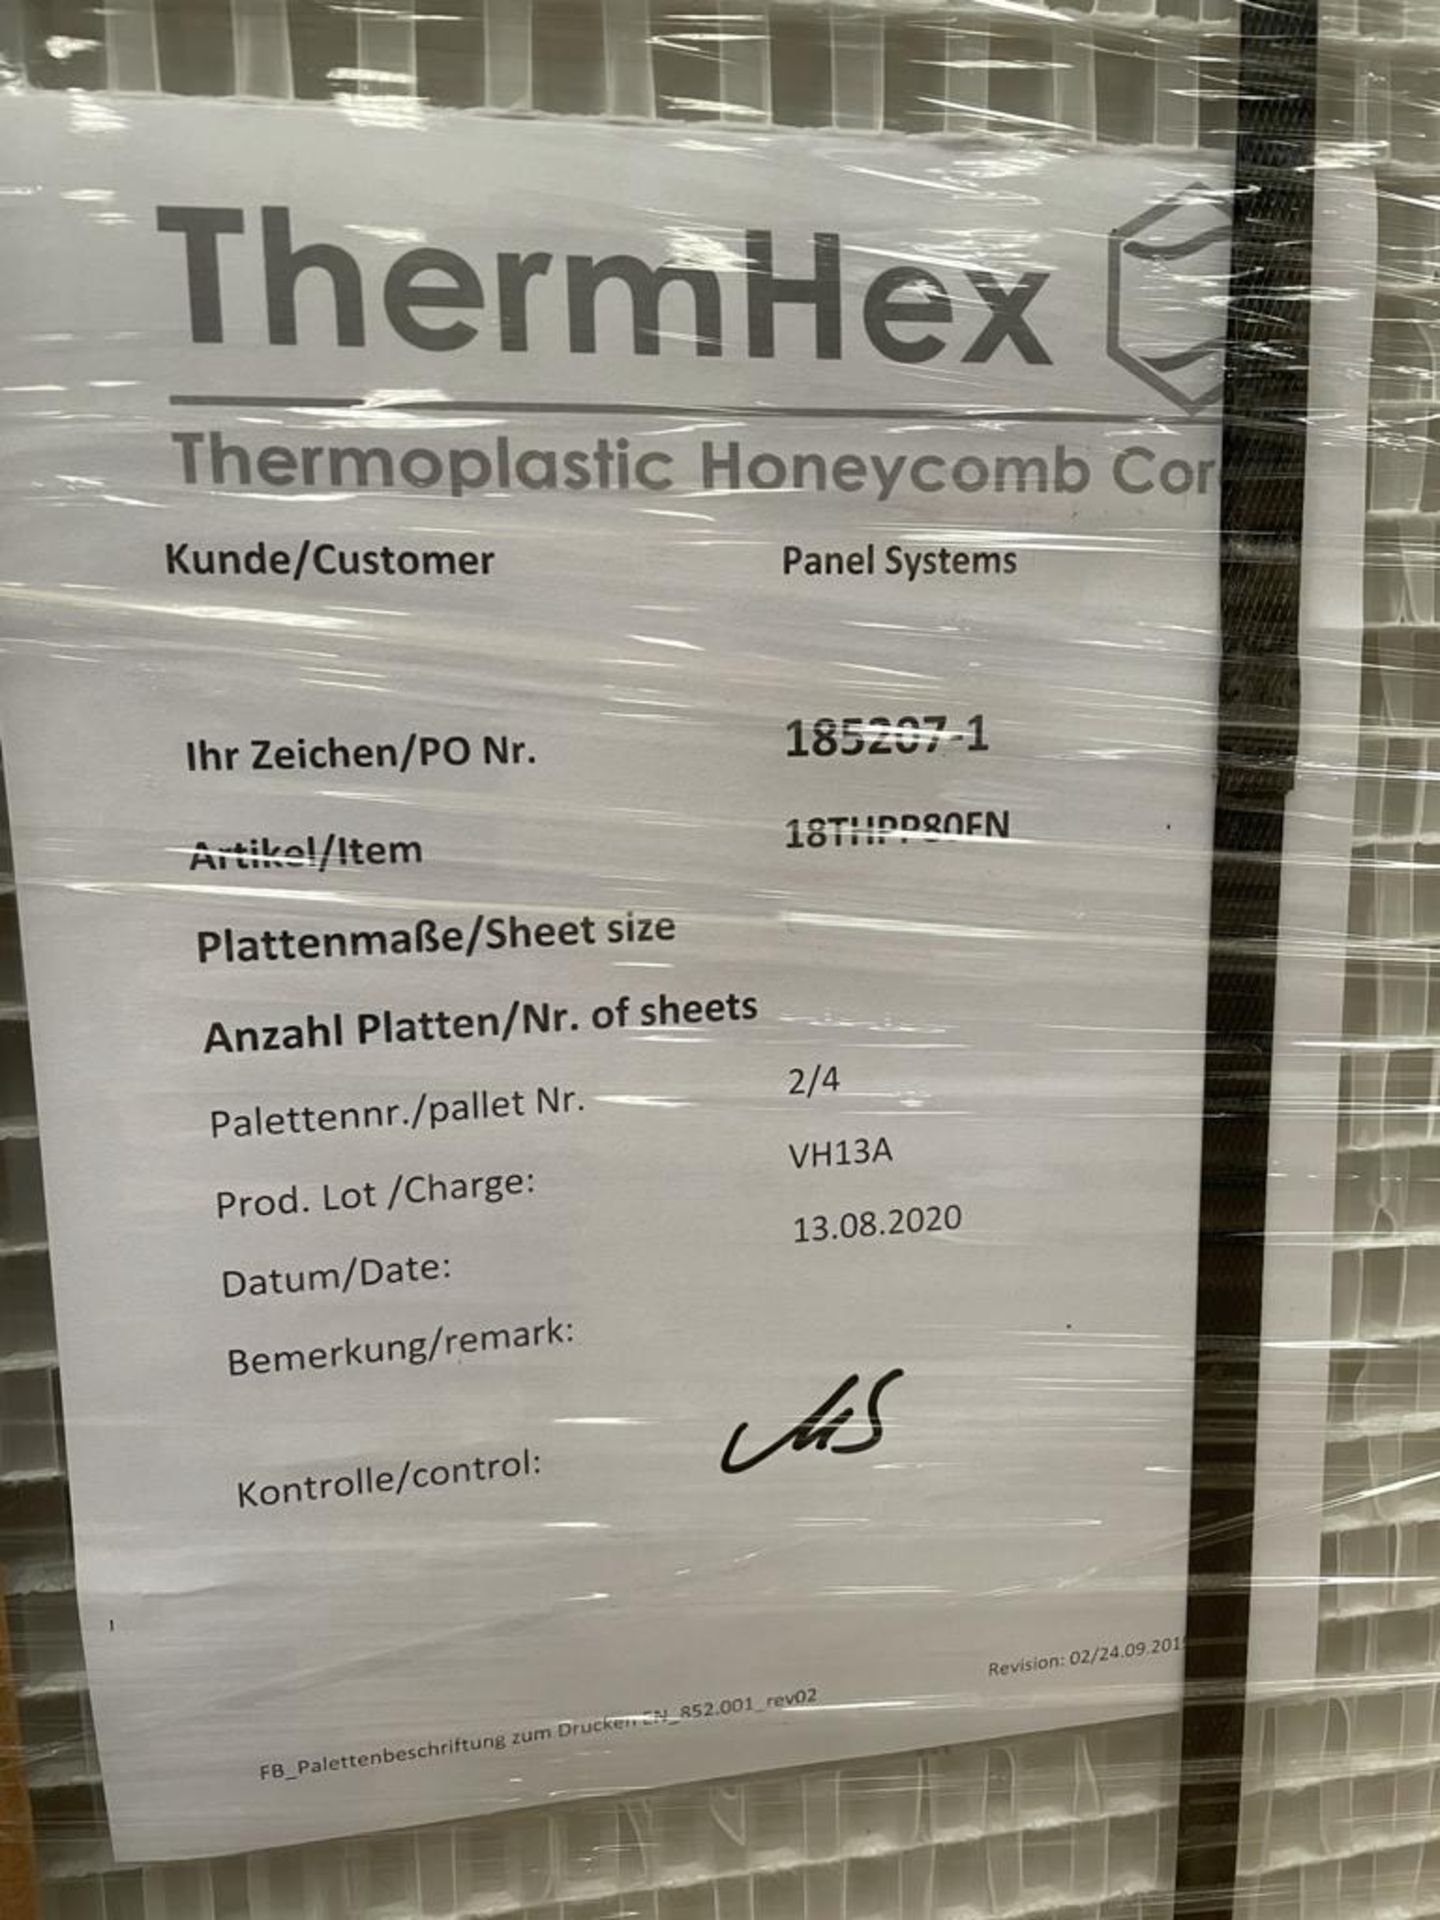 12 x ThermHex Thermoplastic Honeycomb Core Panels - Size 3558 x 1215 x 20mm - New Stock - - Image 2 of 15